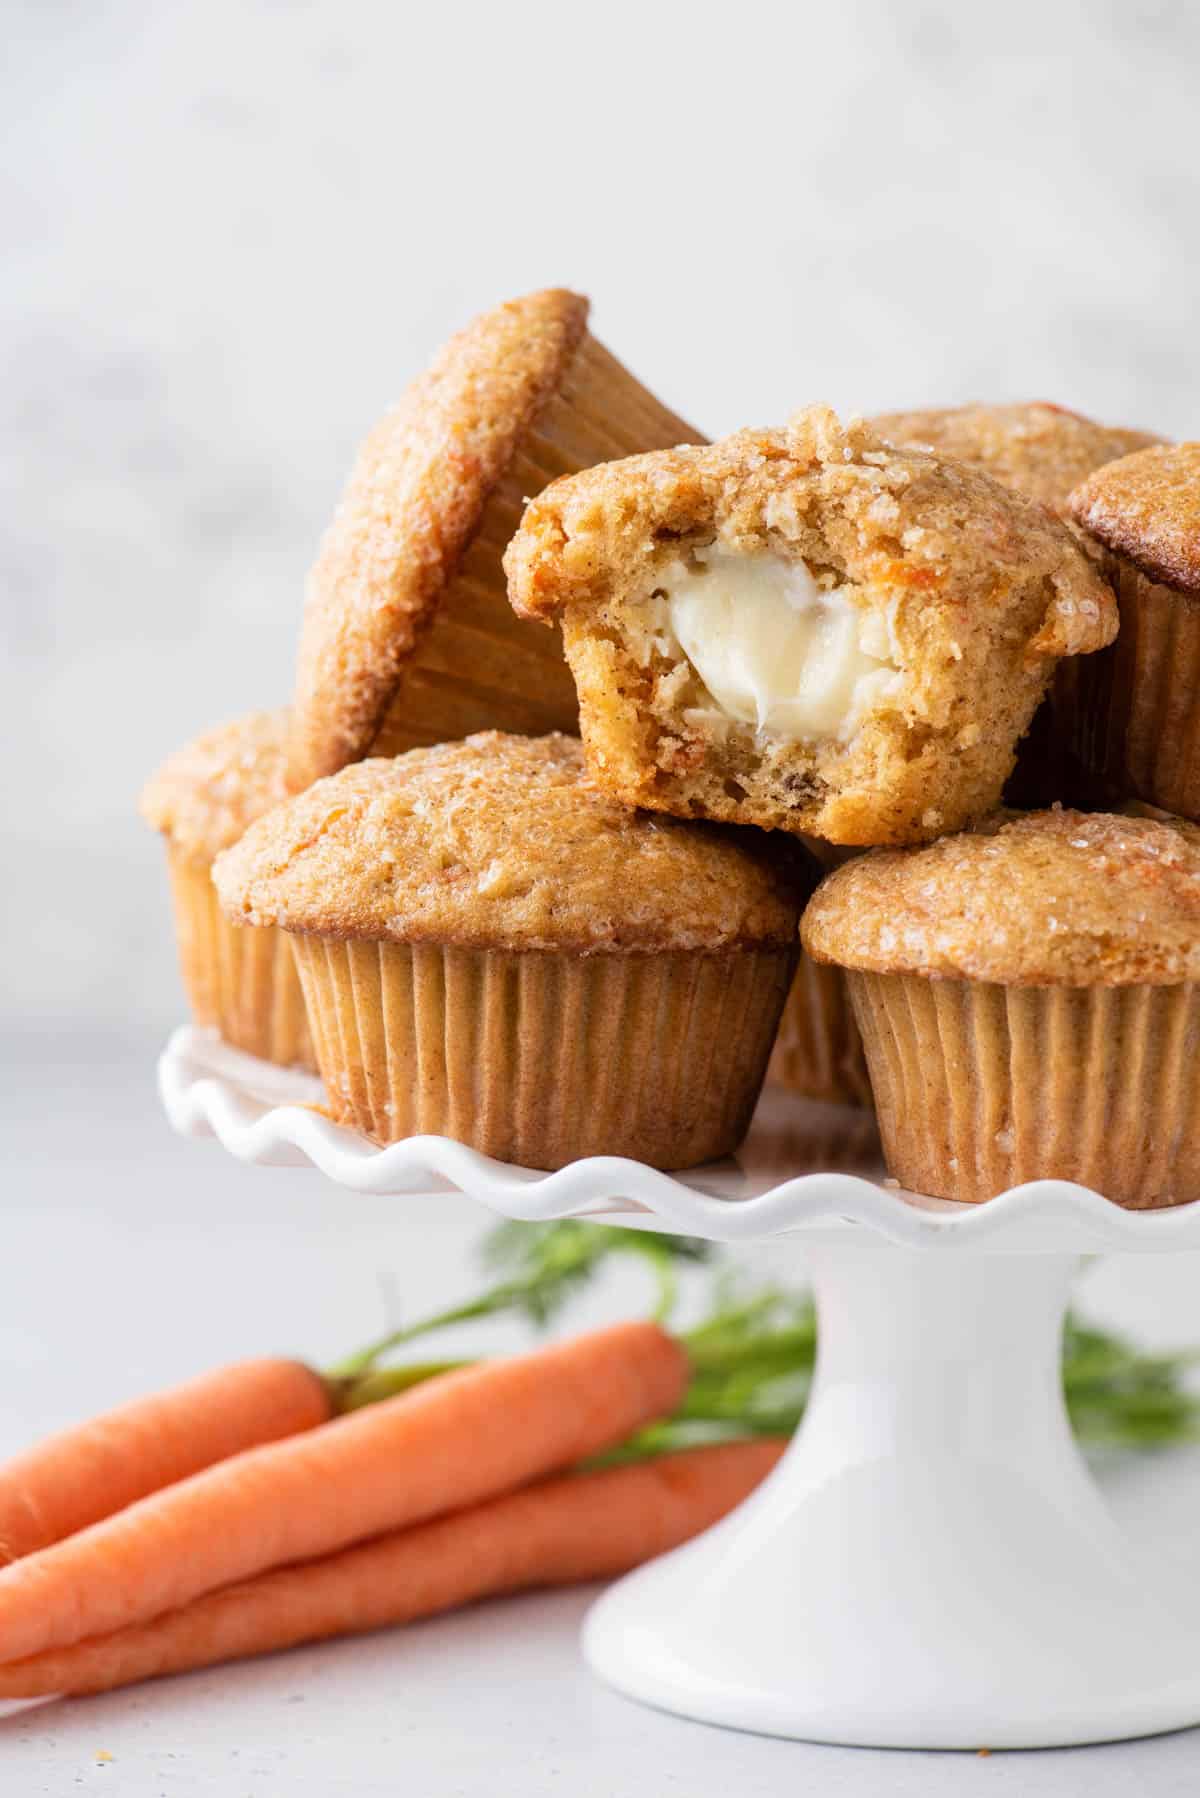 a pile of carrot cake muffins sitting on a white cake platter with carrots beneath it and one of the muffins half eaten, revealing the cream cheese filing inside